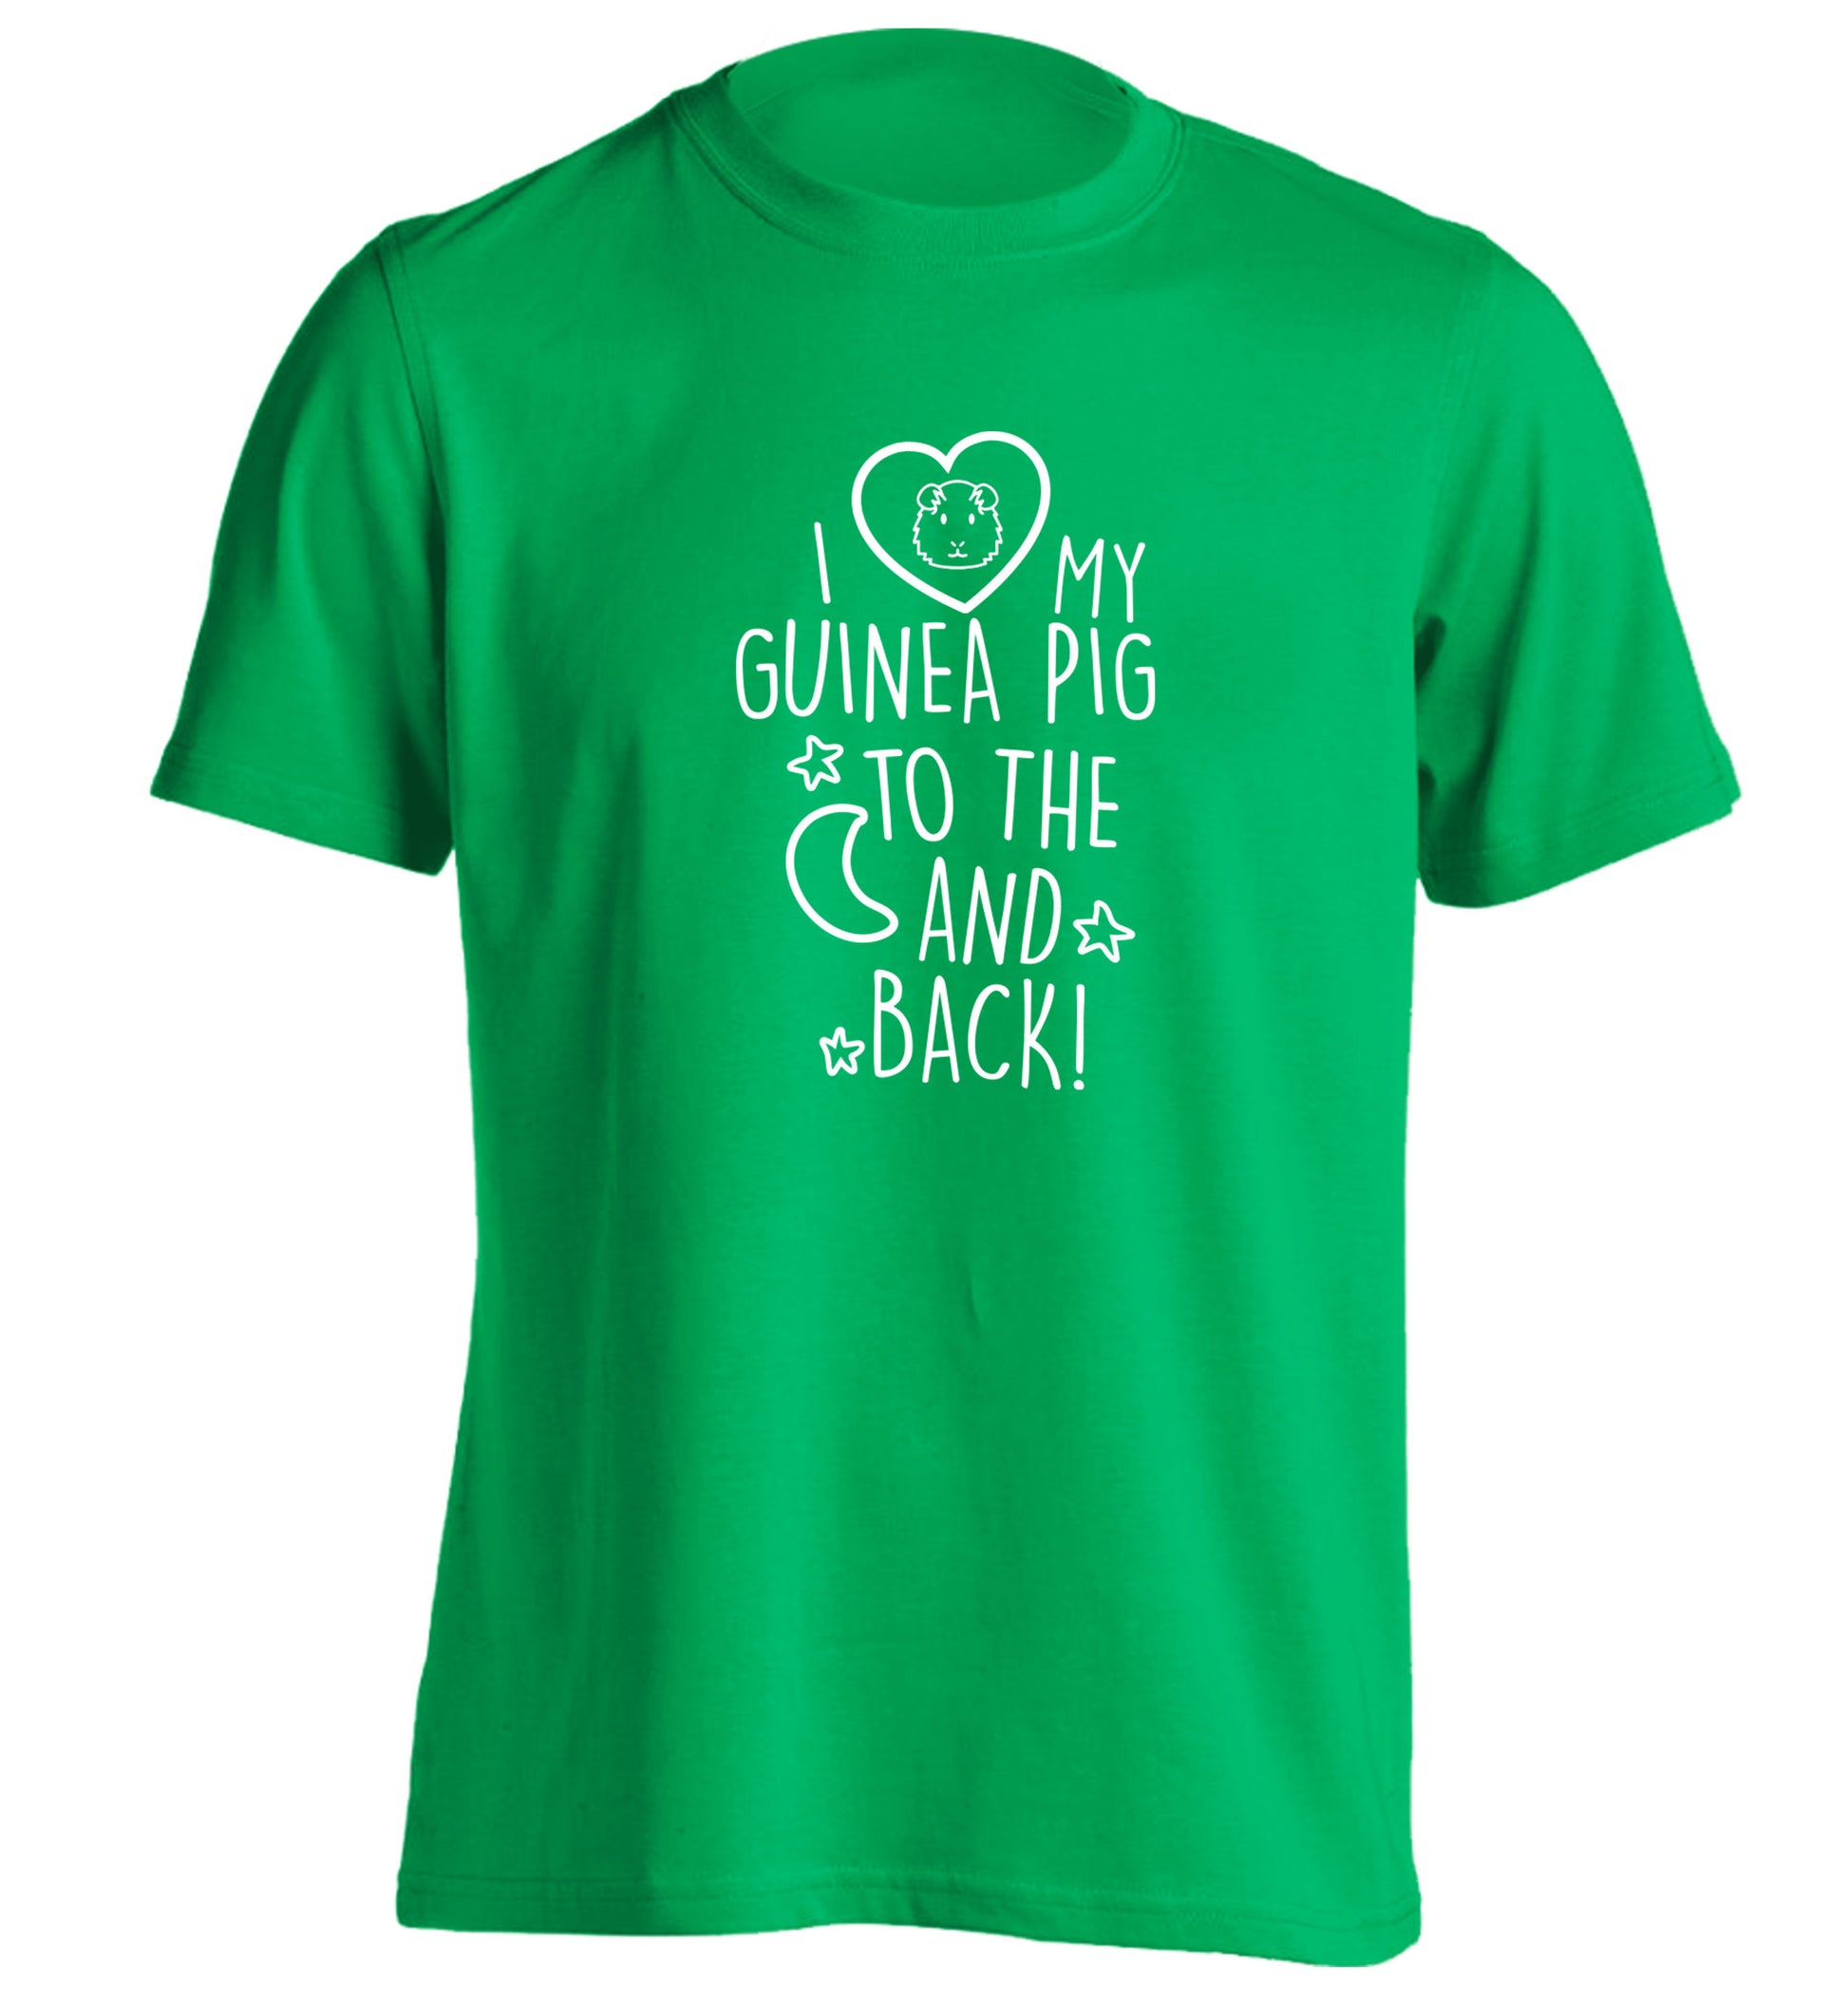 I love my guinea pig to the moon and back adults unisex green Tshirt 2XL